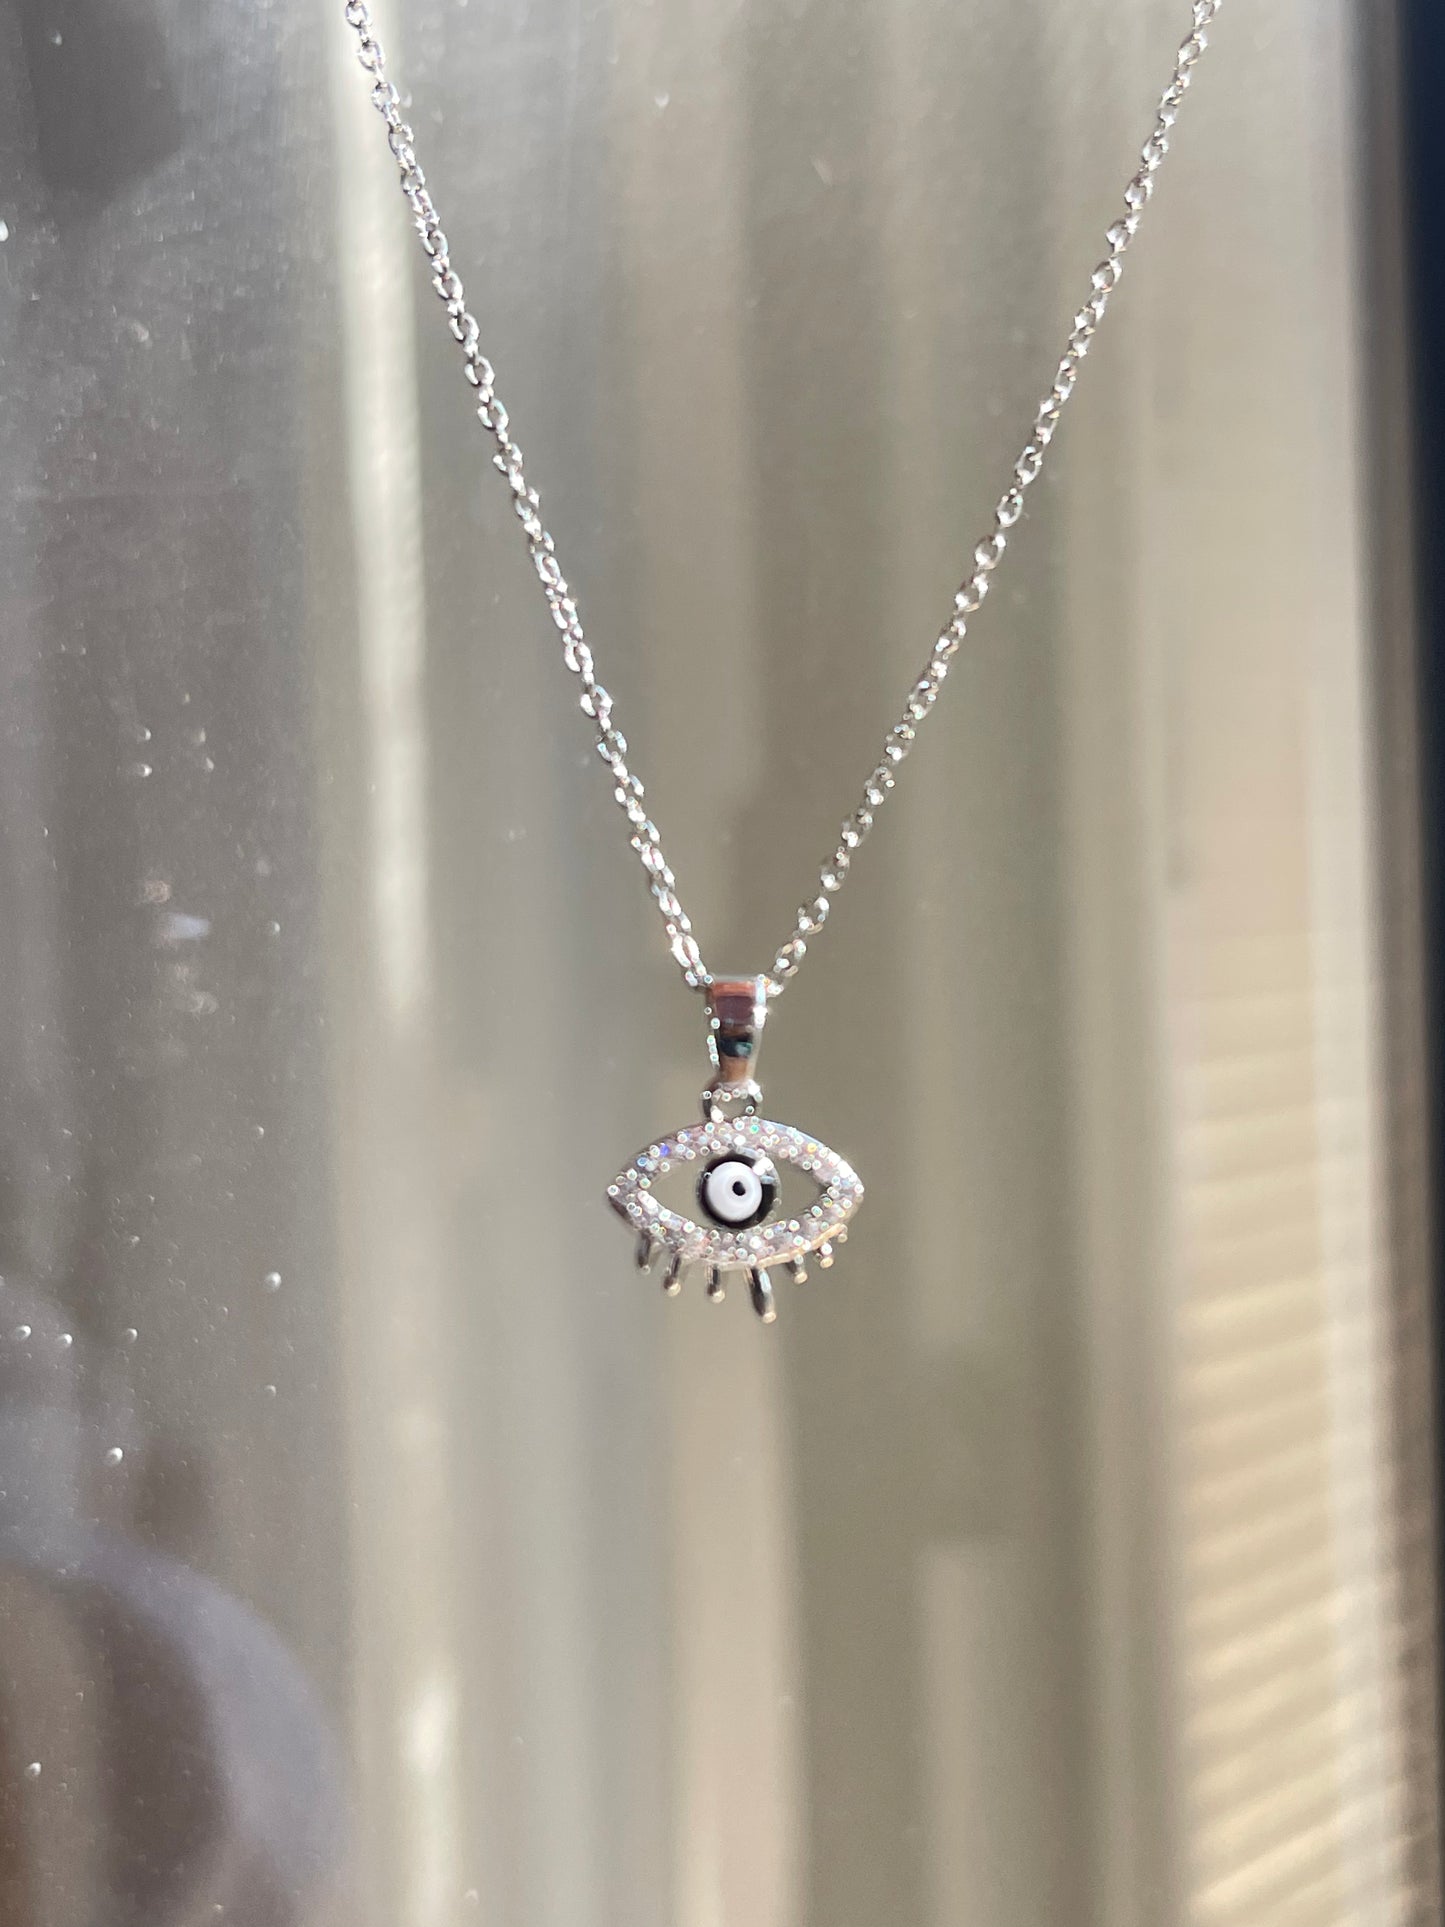 All Eyes on Me Necklace-Stainless Steel